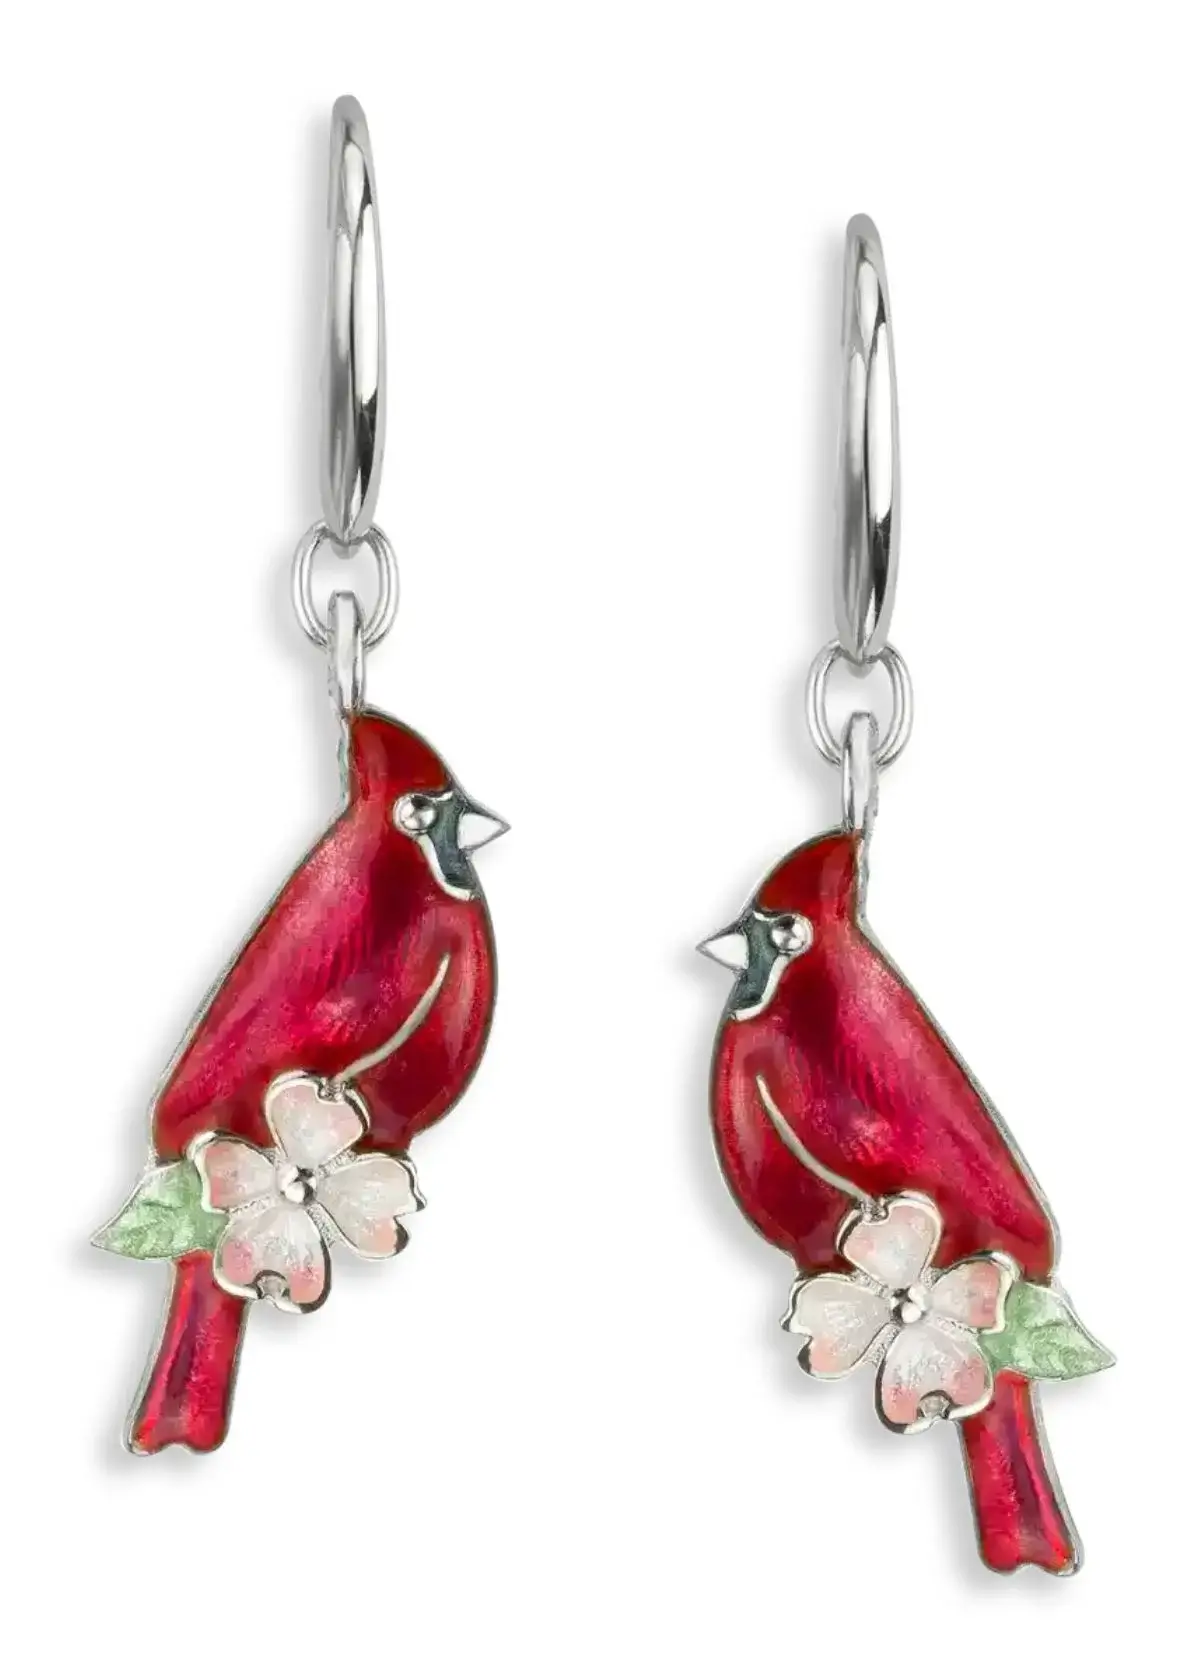 What are Cardinal Earrings Made of?